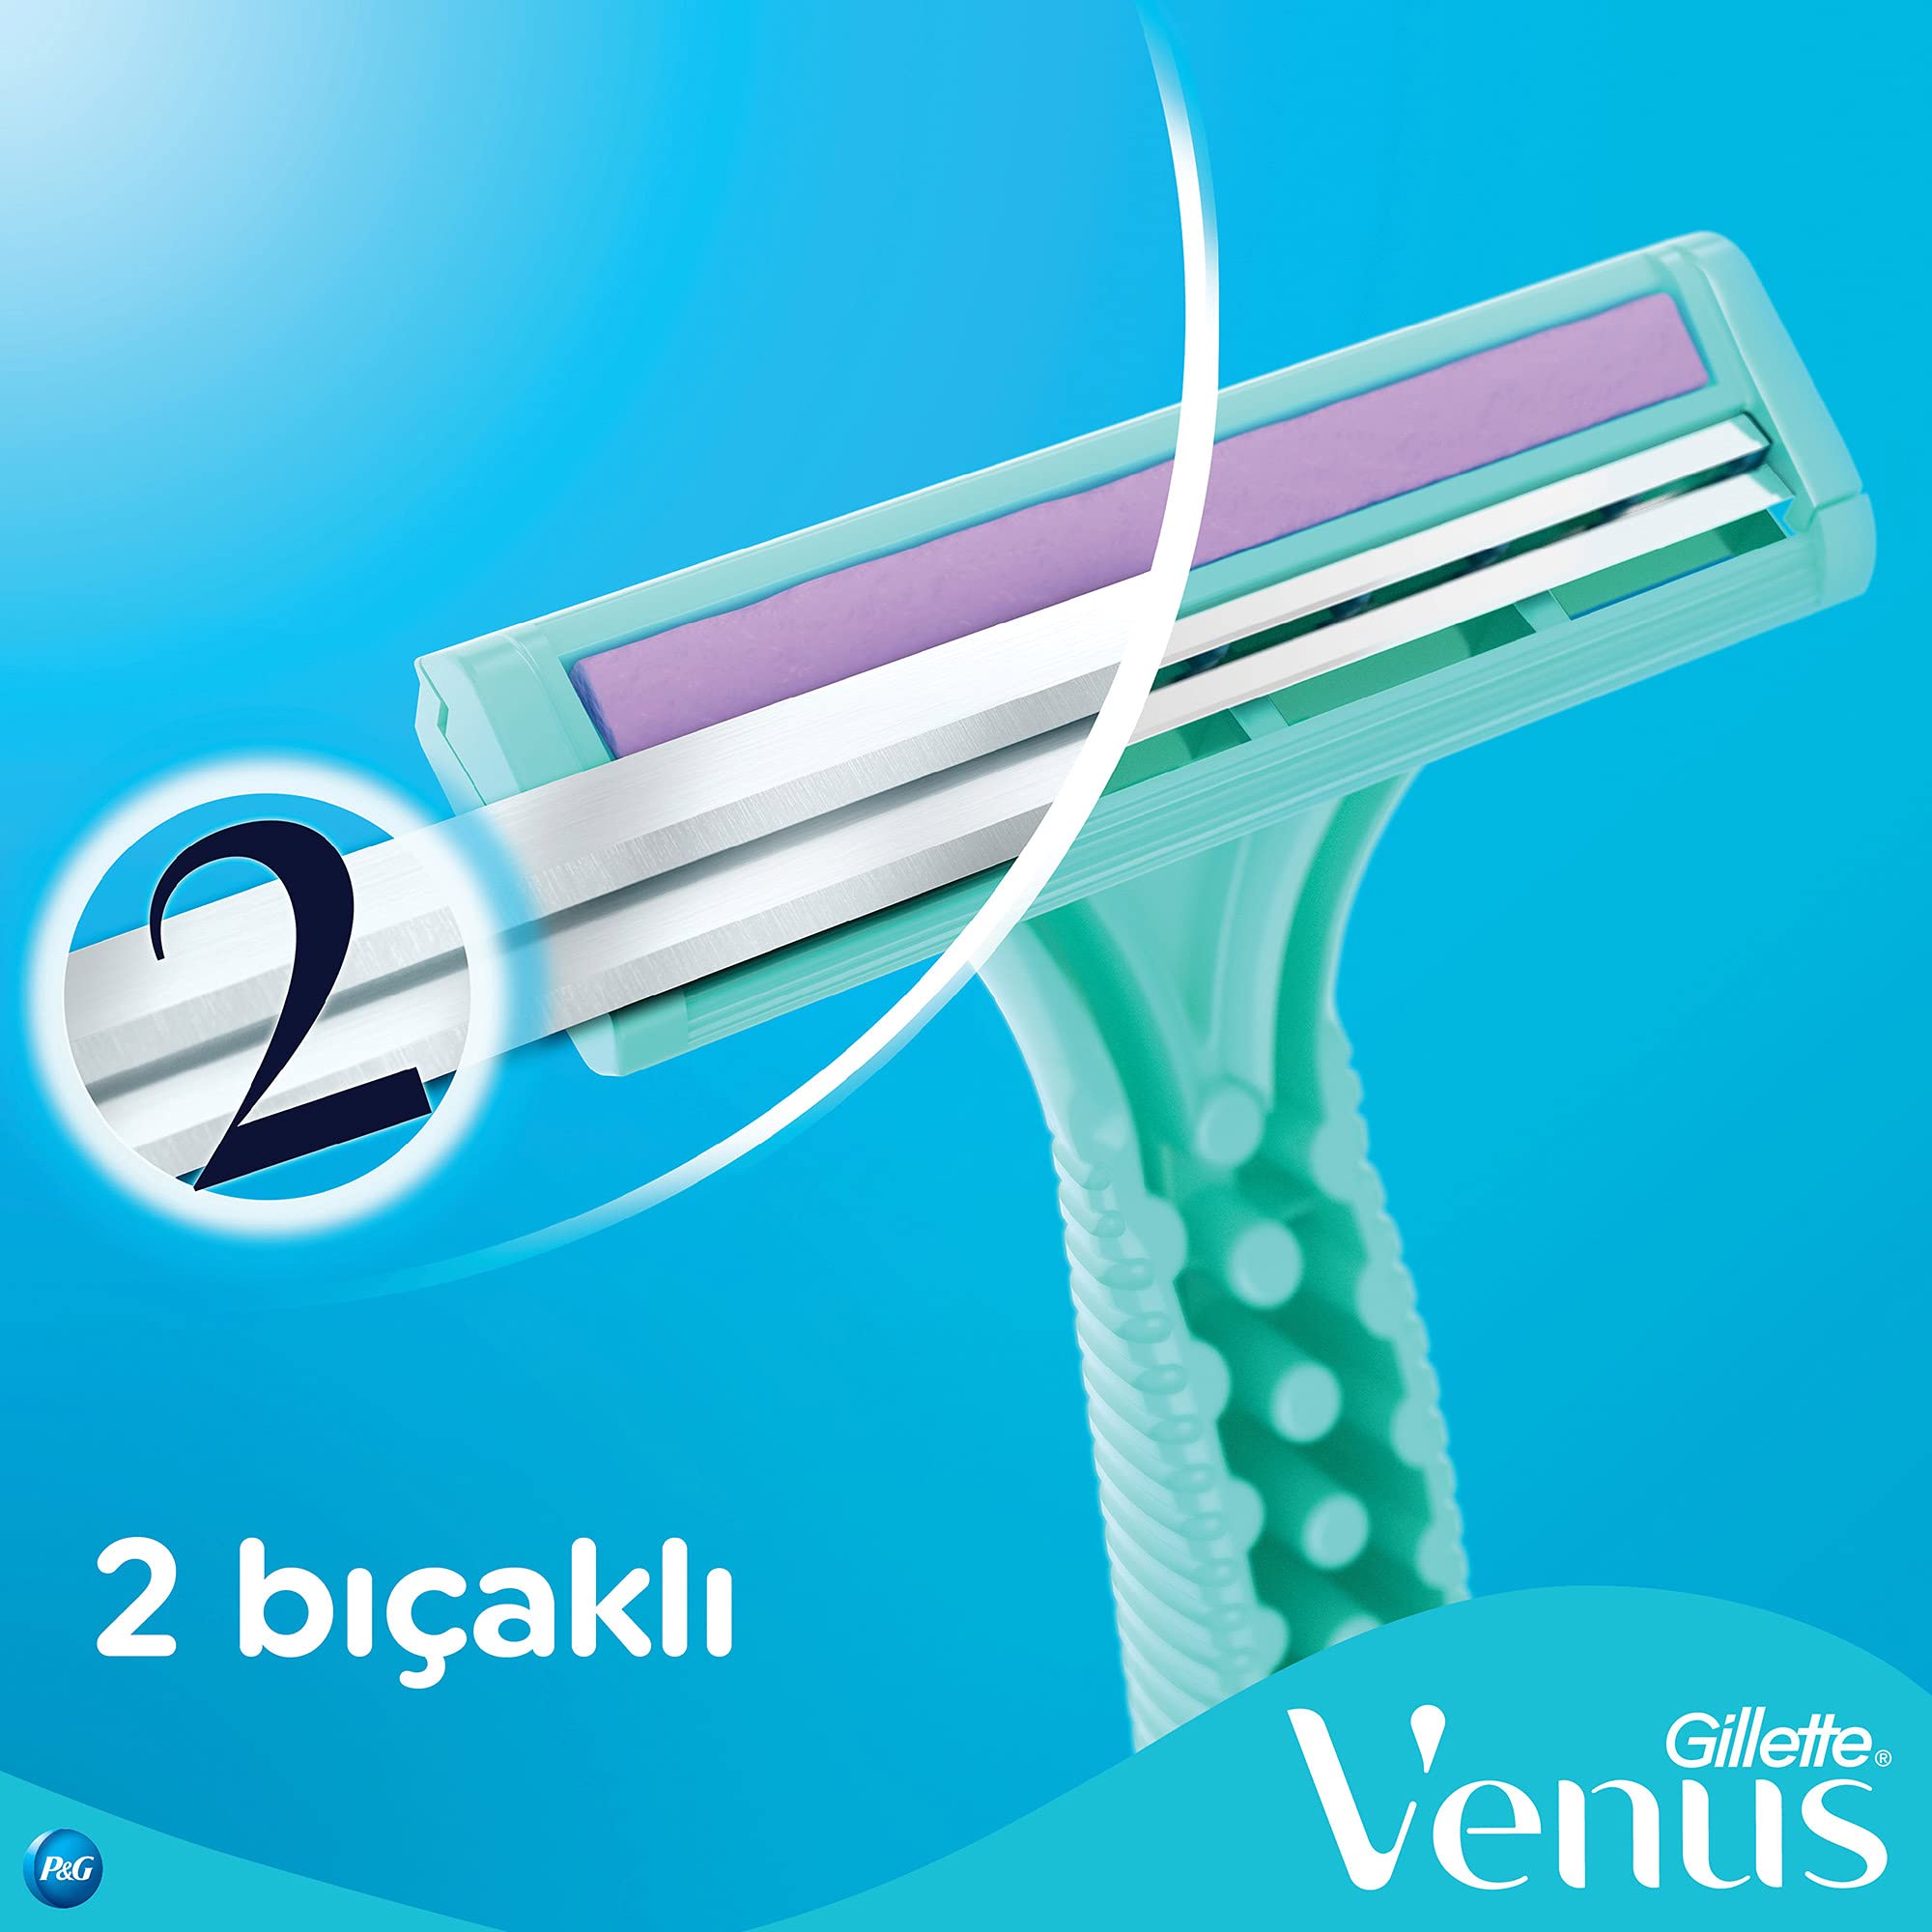 Gillette Simply Venus 2 Blade Disposable Razors With A Touch of Aloe, 4 Count - image 3 of 7